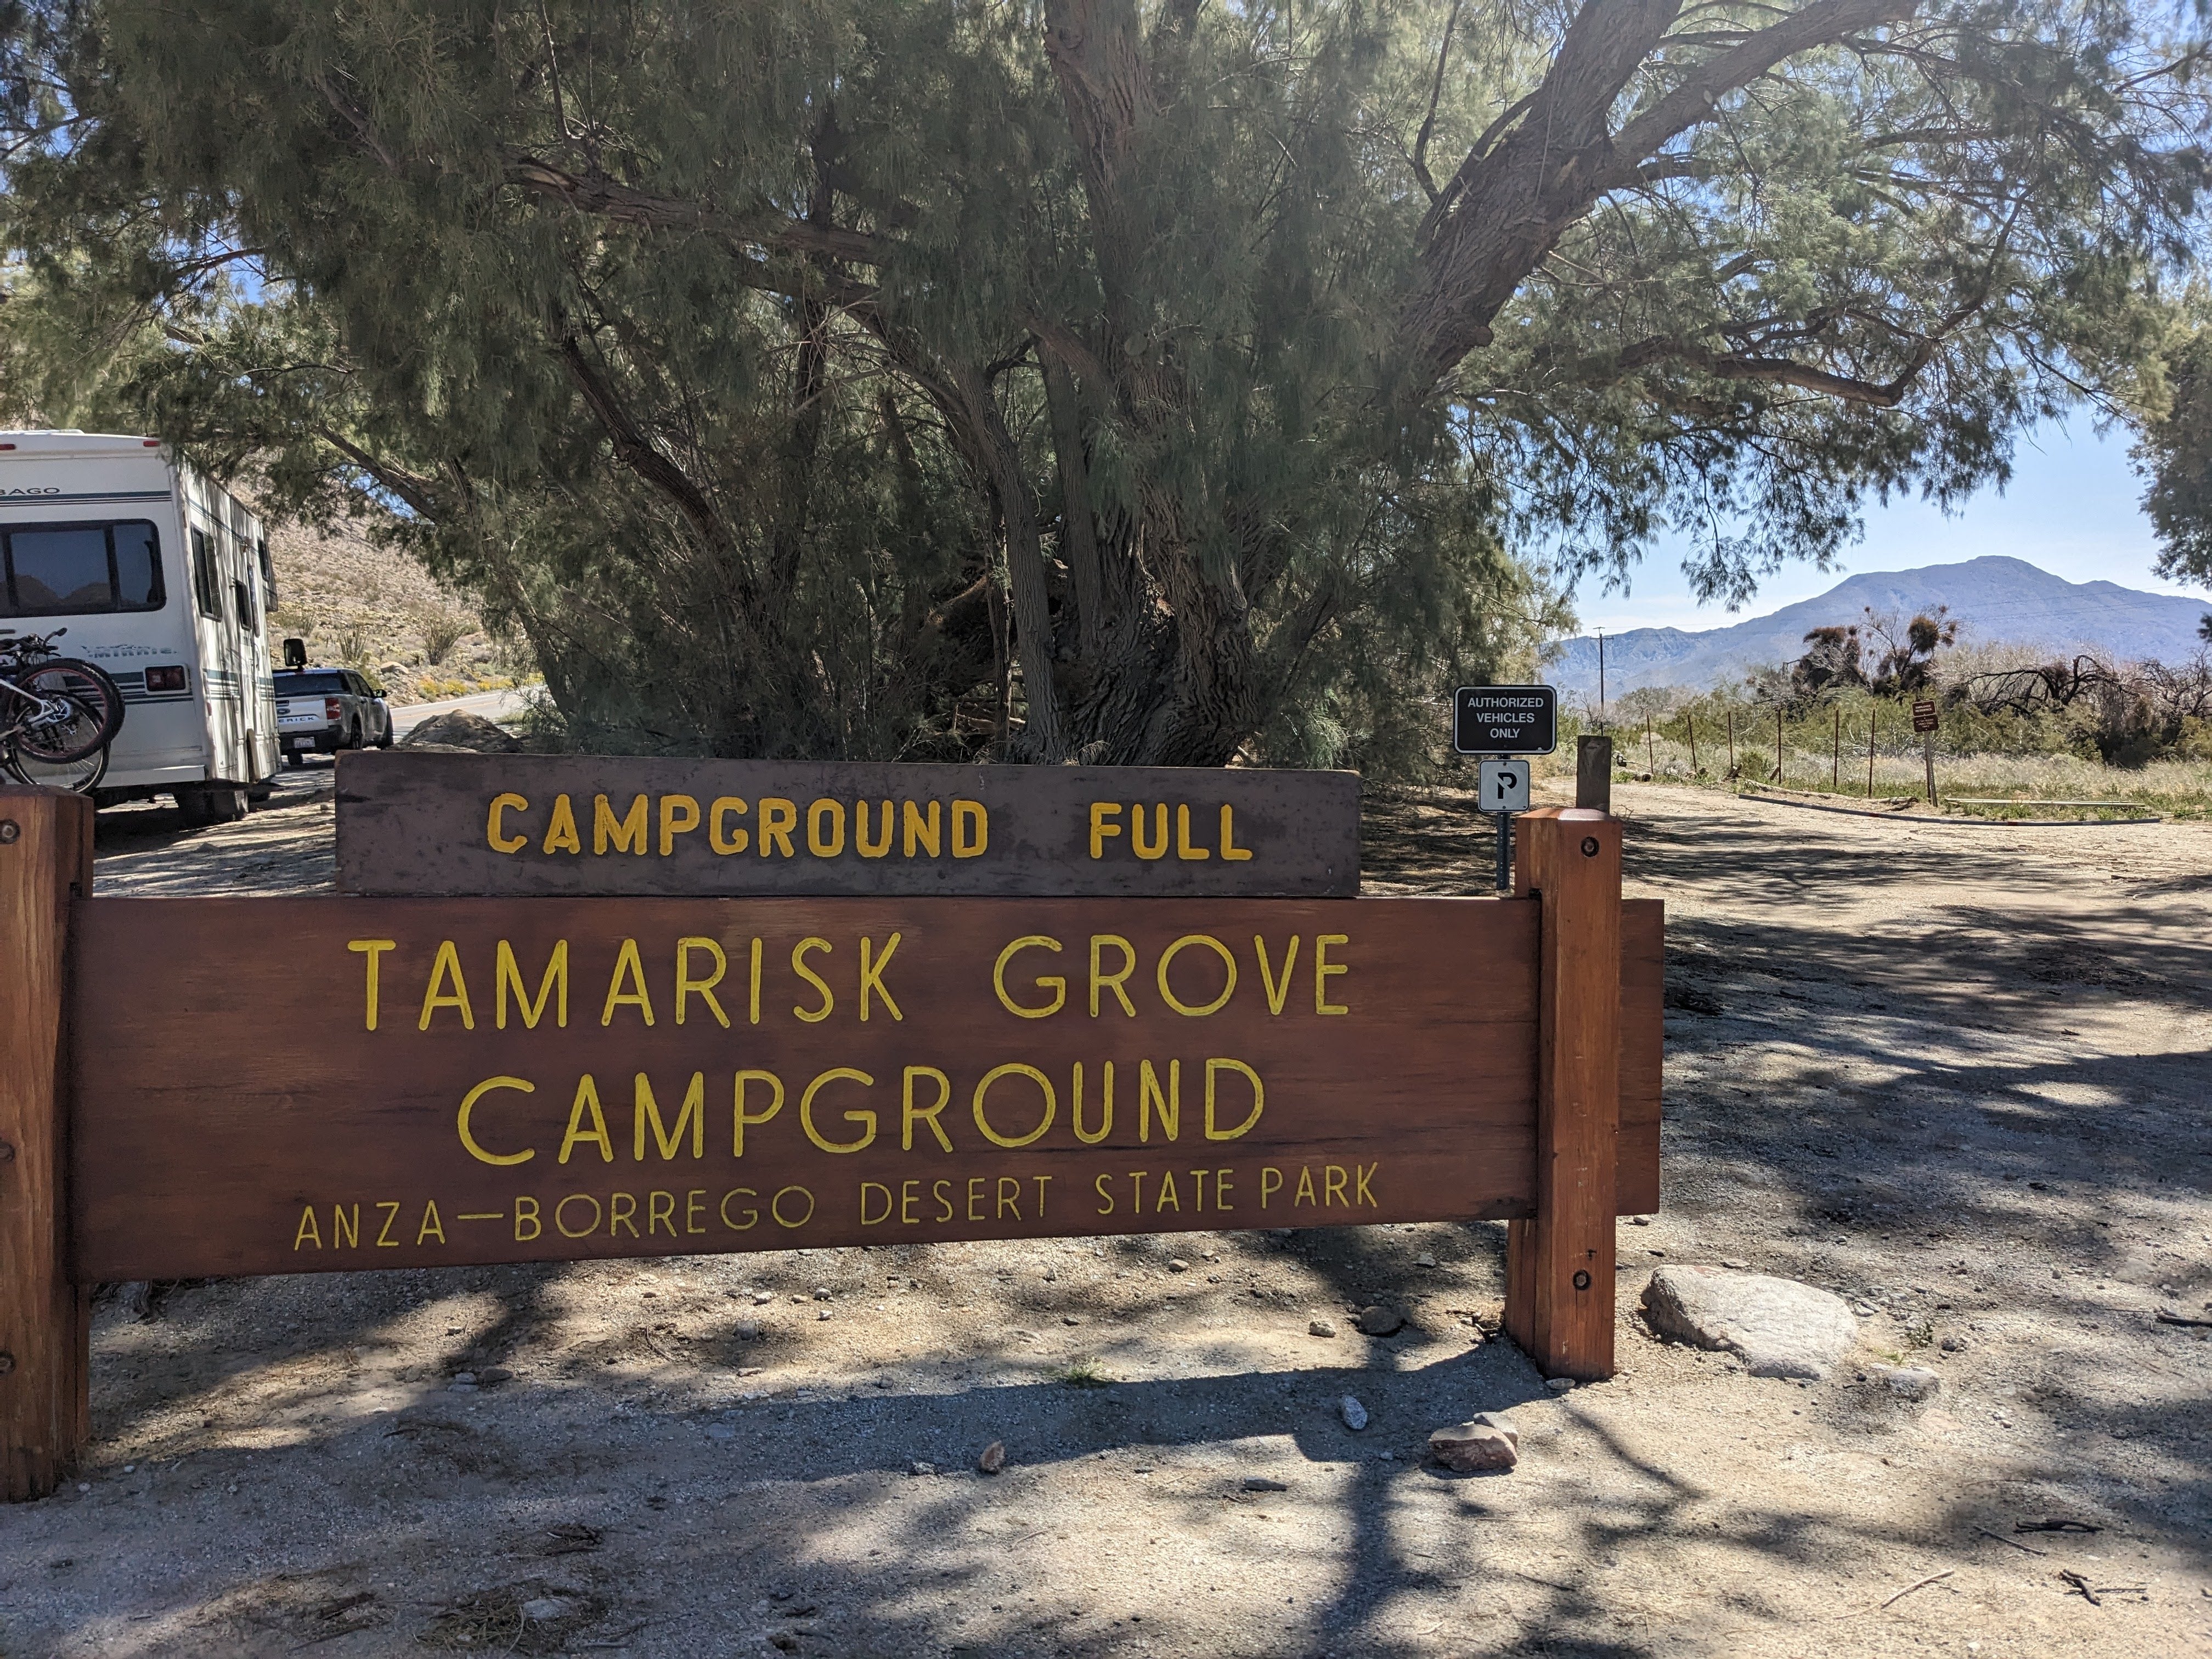 Camper submitted image from Tamarisk Grove Campground — Anza-Borrego Desert State Park - 4